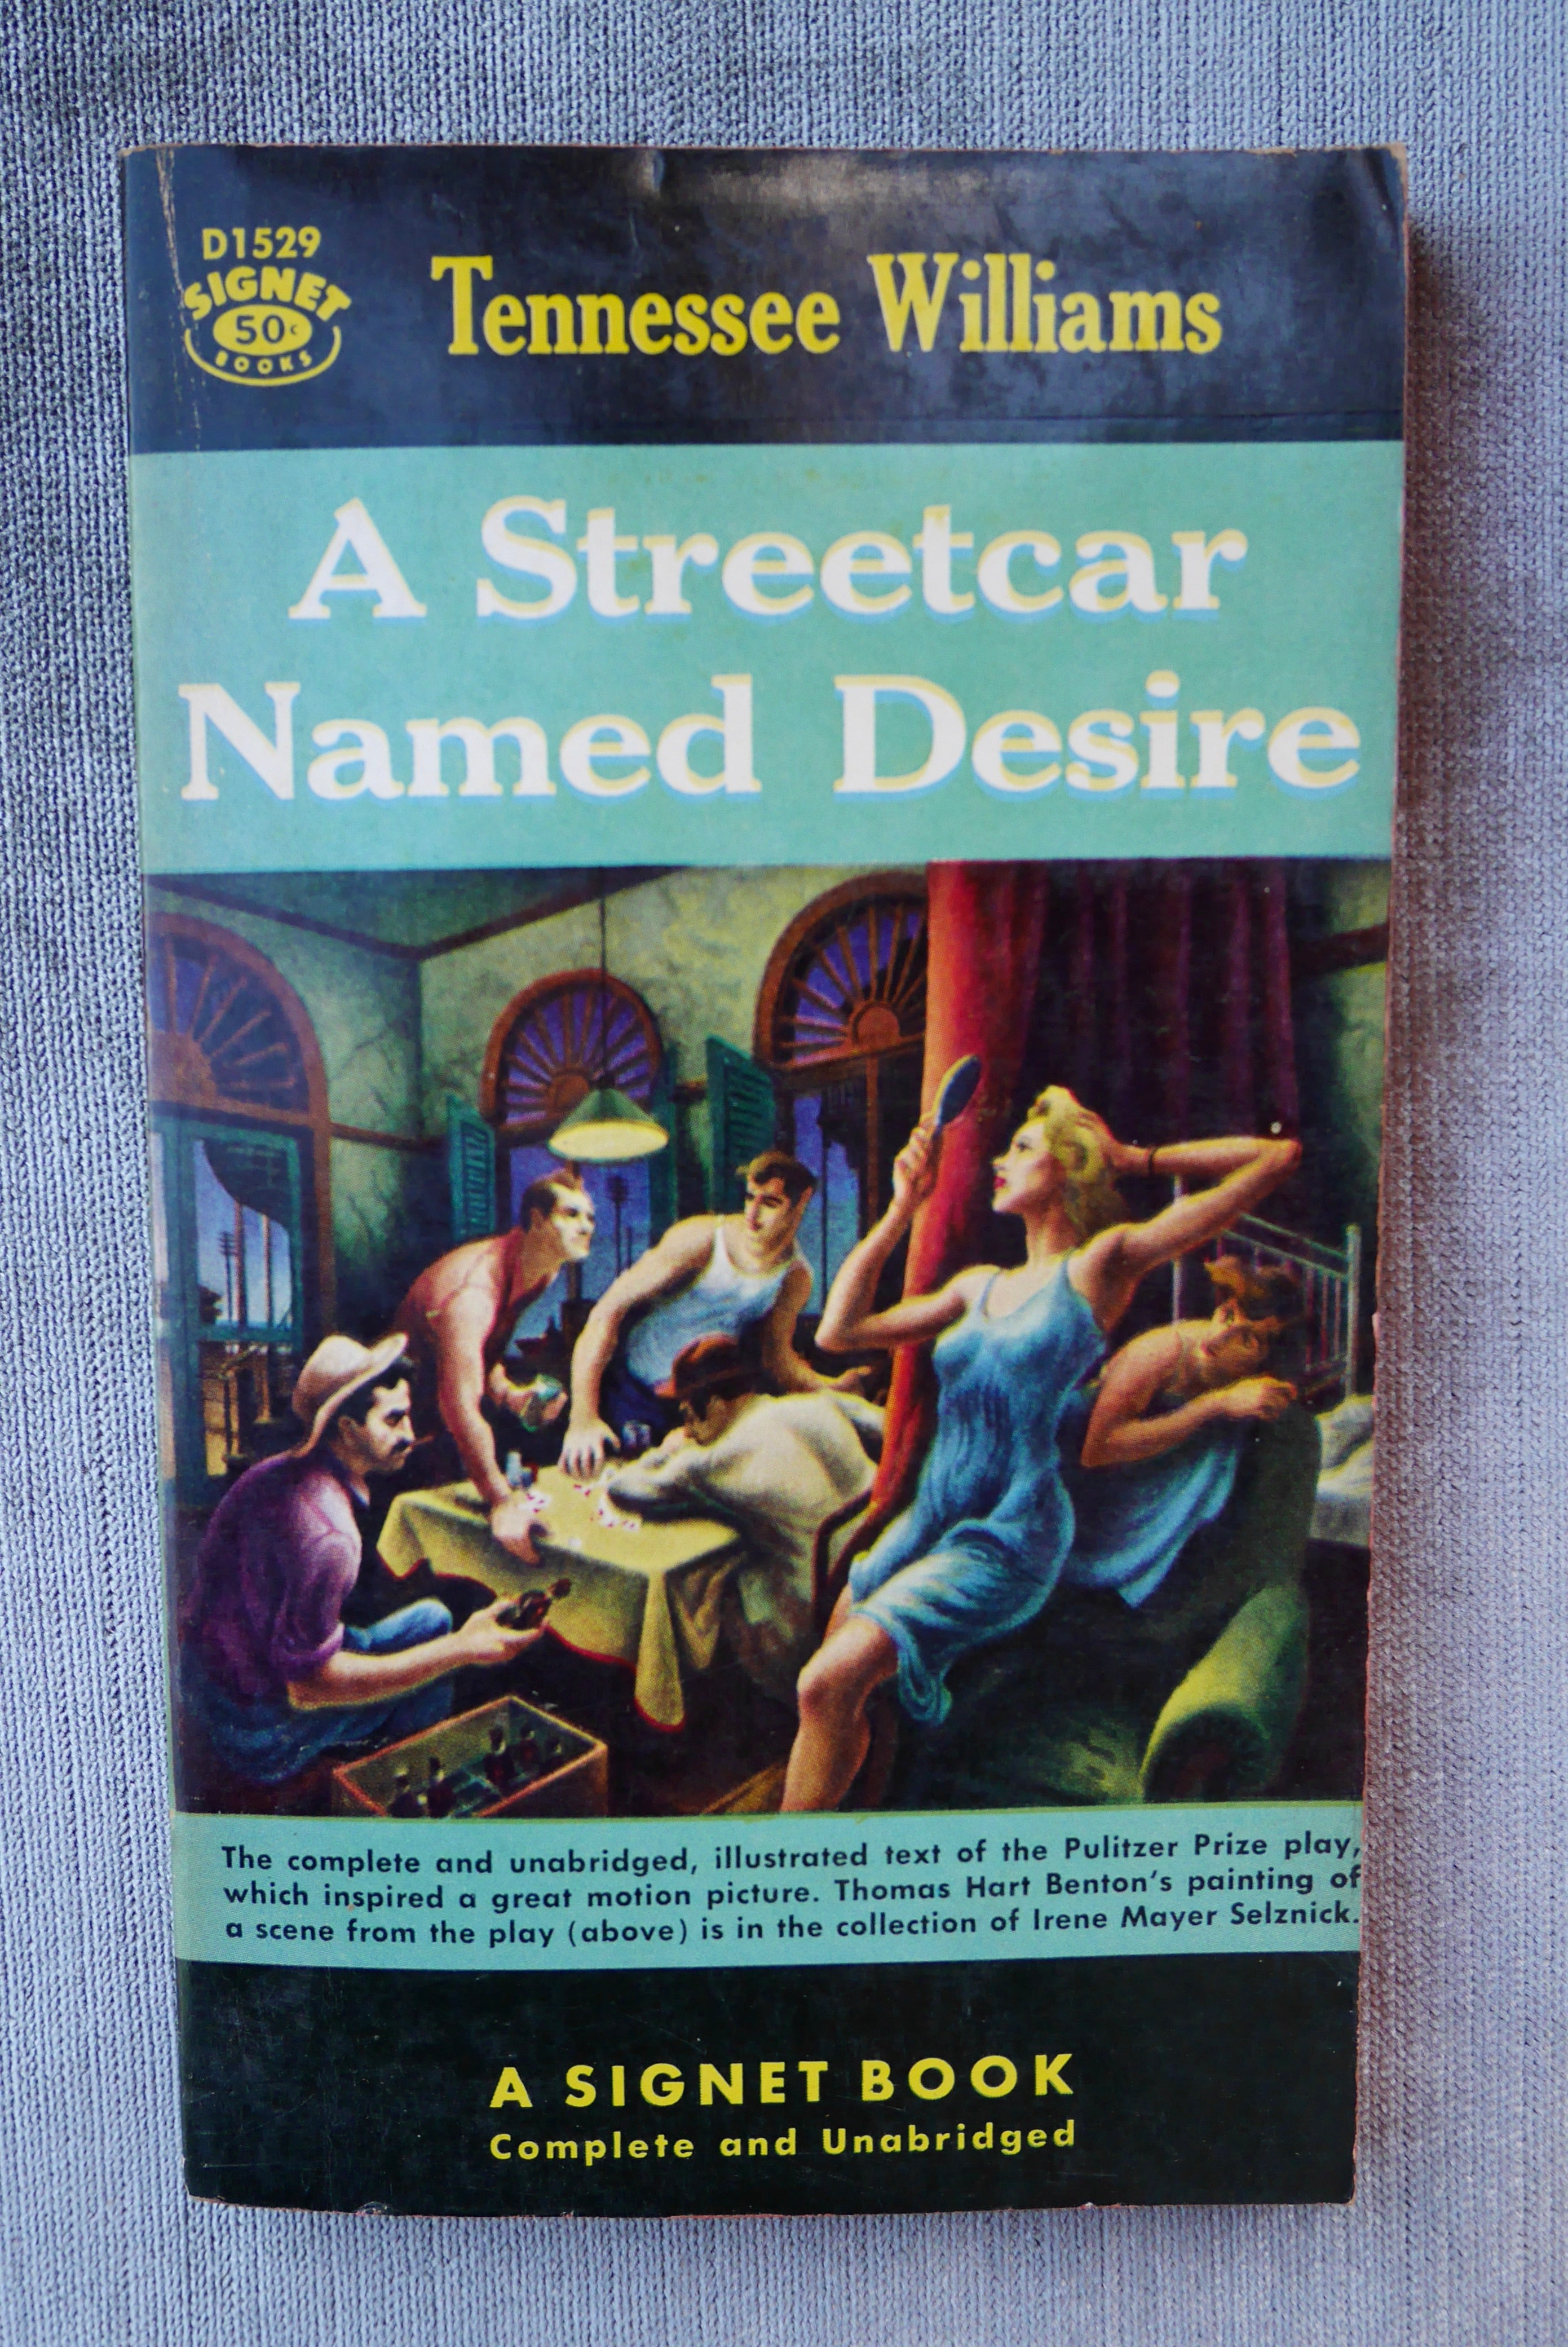 Tennessee Williams, A Streetcar Named Desire, Complete Play Script, Signet, 1958 Paperback